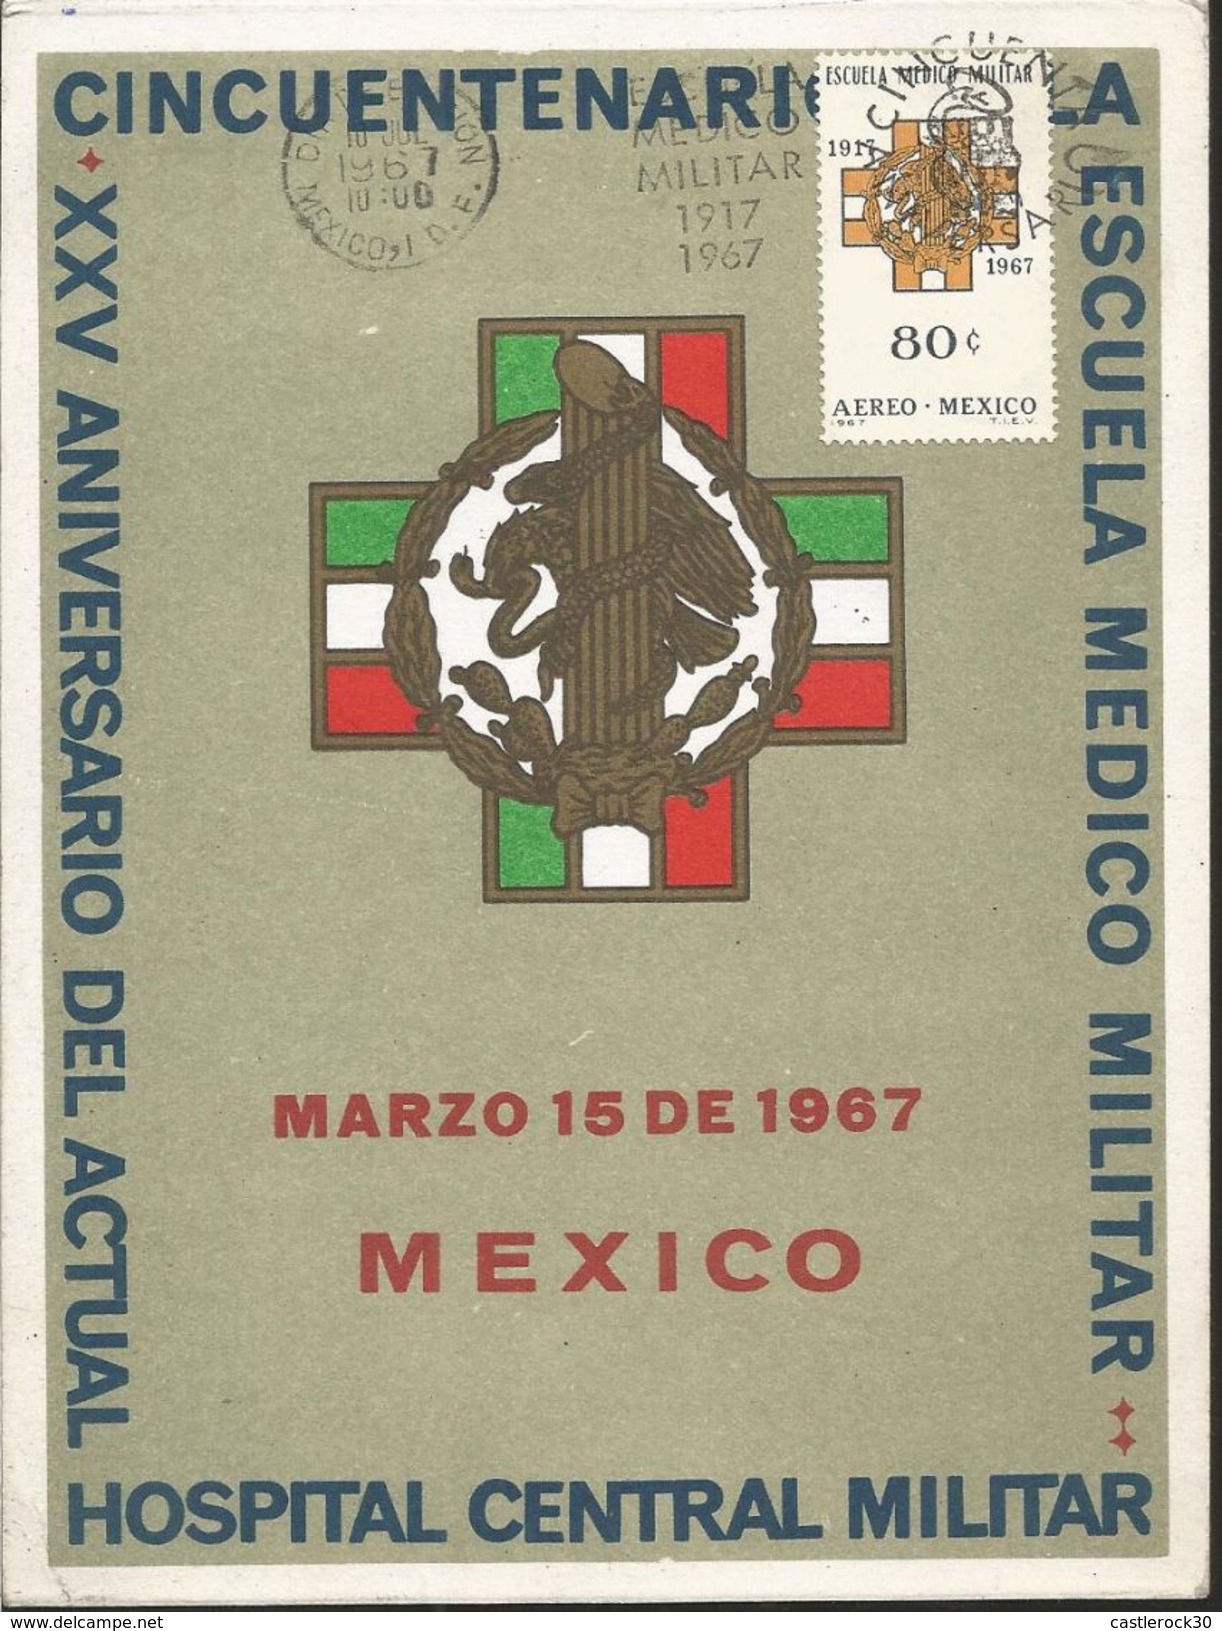 J) 1967 MEXICO, 50TH ANNIVERSARY OF THE MILITARY MEDICAL SCHOOL, EMBLEM, SET OF 6 FDC, 2 MAXIMUM CARD AND 3 FDB - Mexico